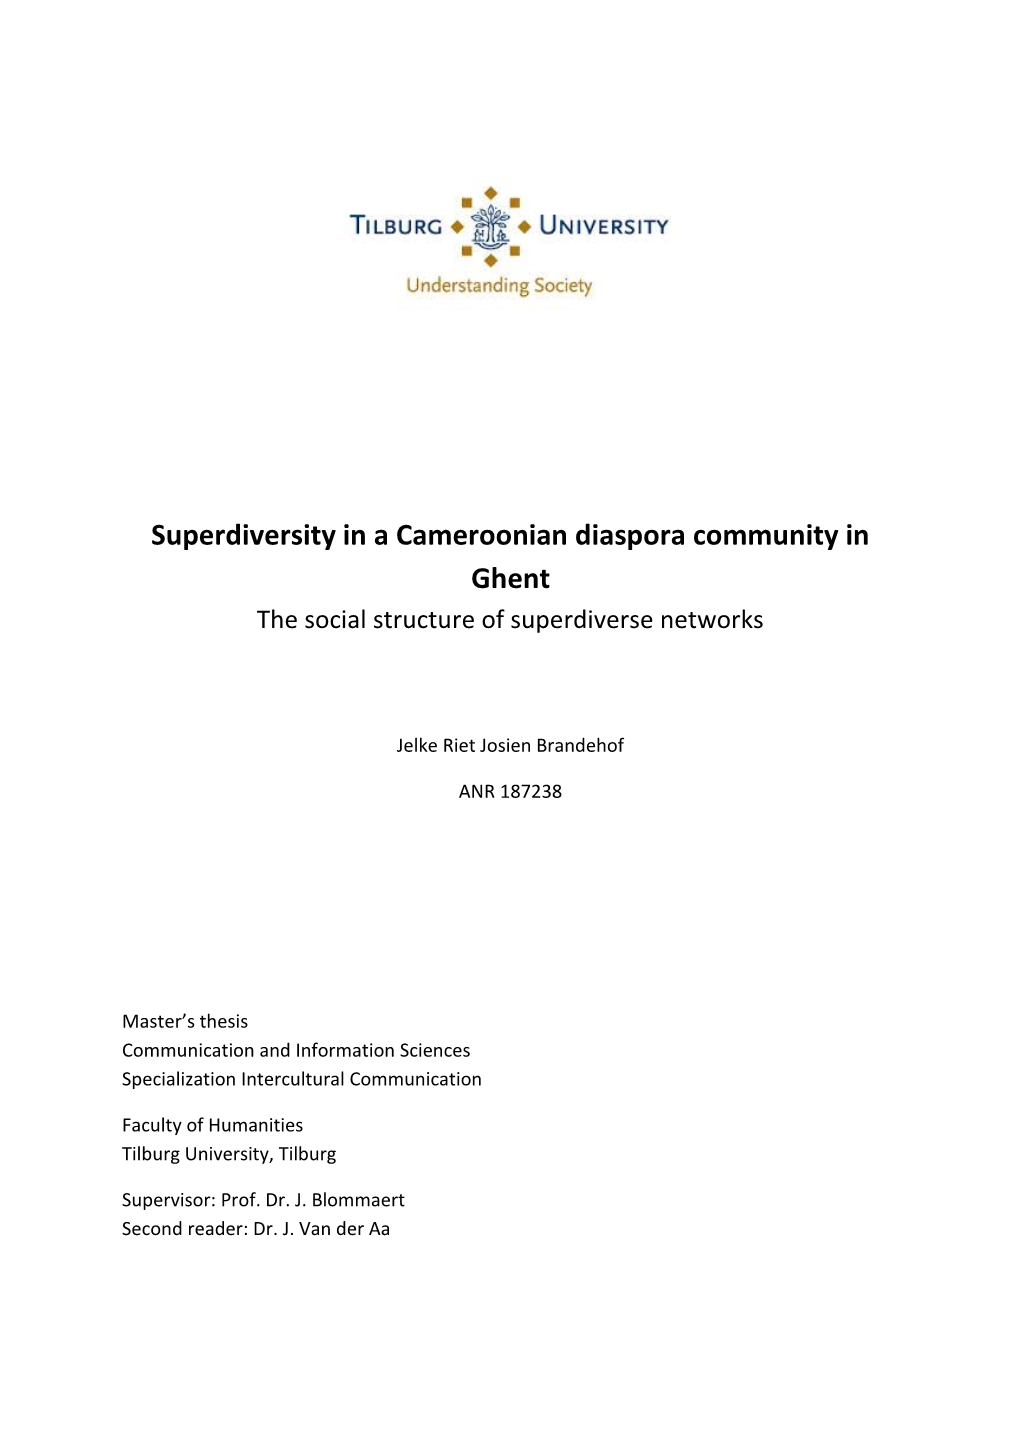 Superdiversity in a Cameroonian Diaspora Community in Ghent the Social Structure of Superdiverse Networks